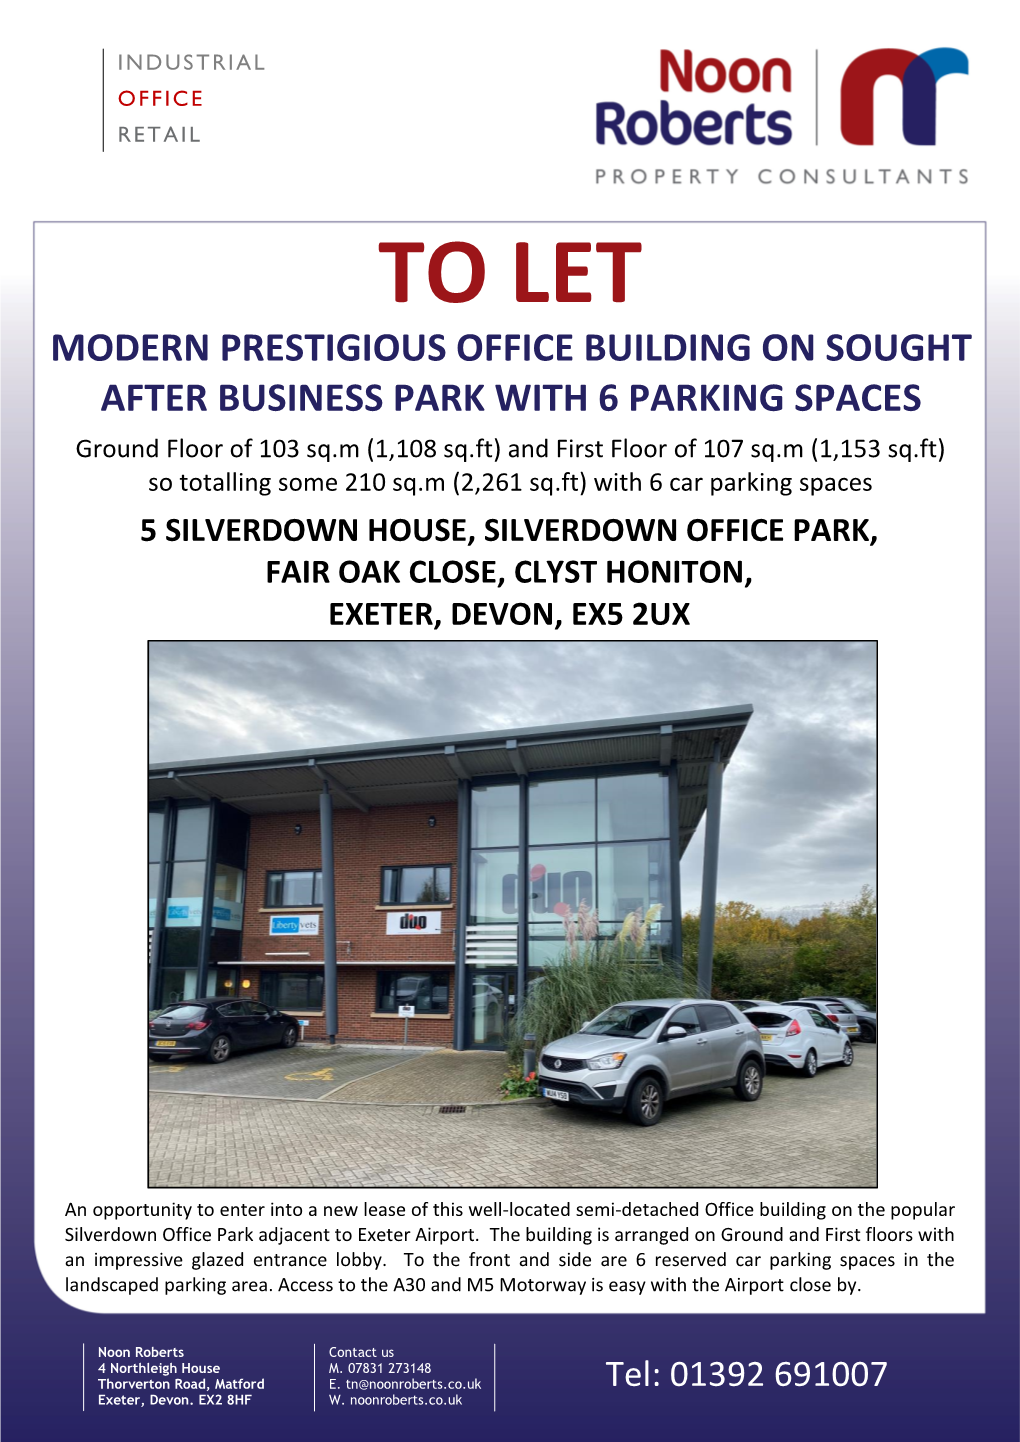 To Let Modern Prestigious Office Building on Sought After Business